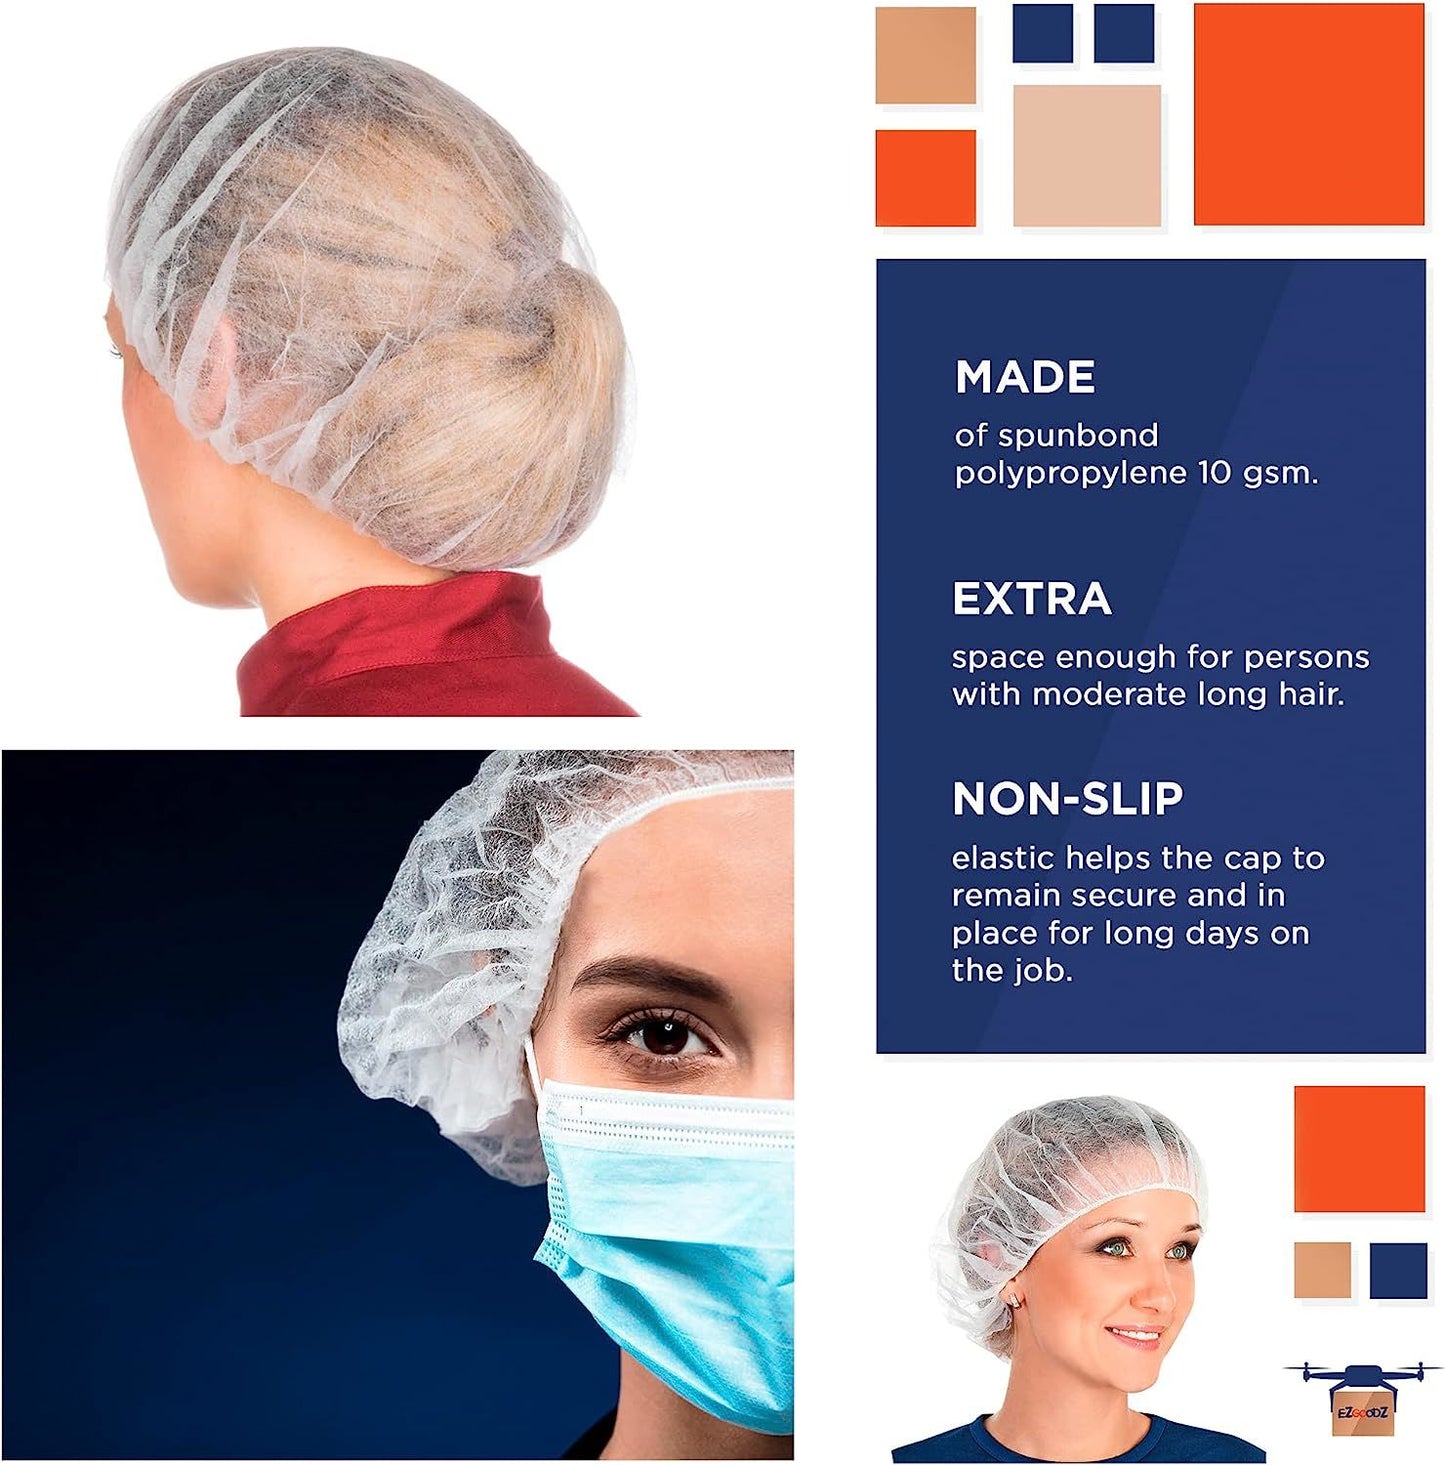 Disposable Hair Caps for Nurses 30''; Pack of 100 White Bouffant Caps Disposable with Elastic Edge; Polypropylene Bouffant Hair Nets; Hairnets for Women Food Service; Cleaning Industry